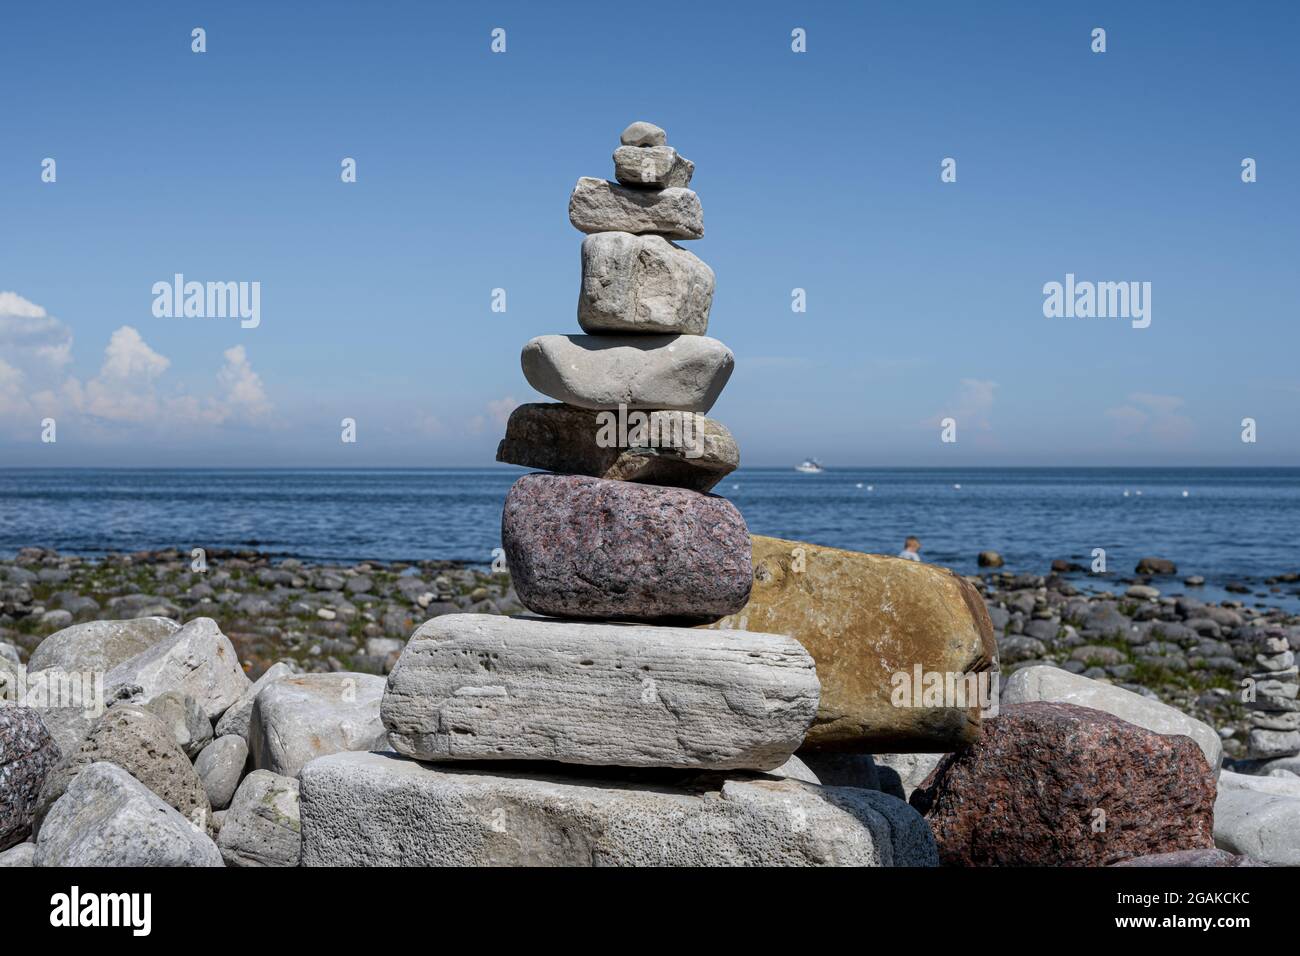 A stack of stones on a beach. Picture from the Baltic Sea island of Oland Stock Photo